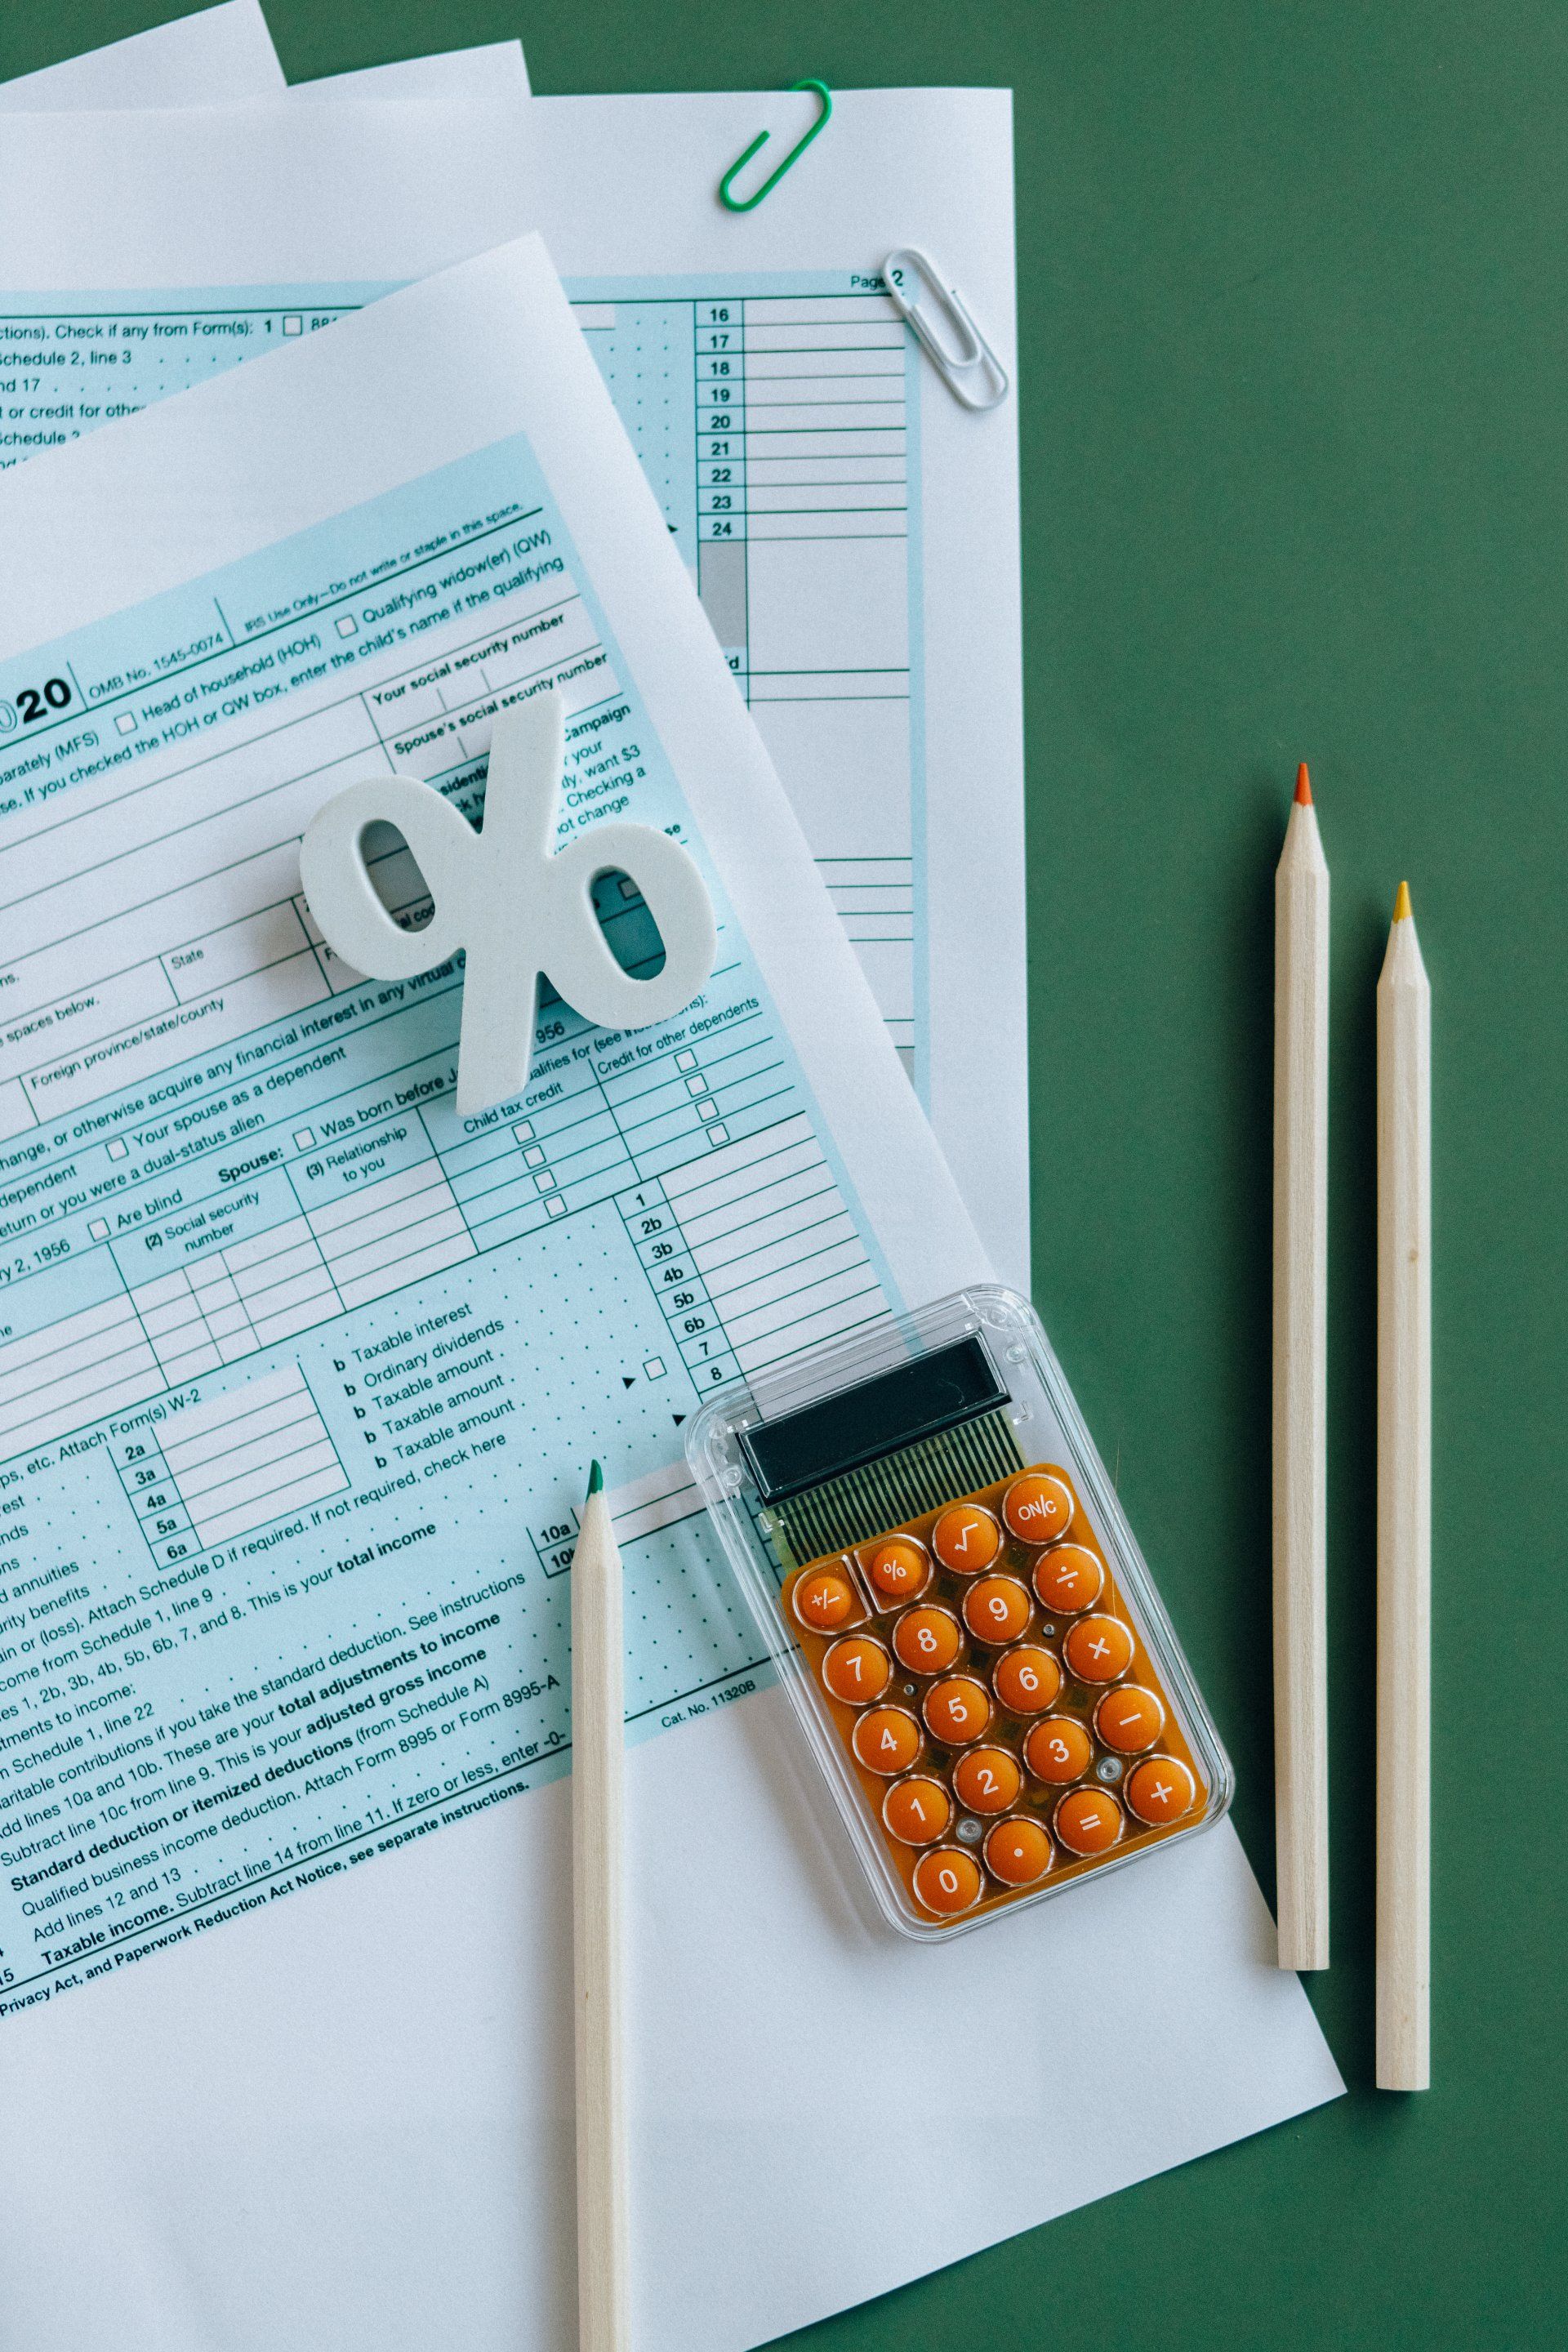 A calculator is sitting on top of a piece of paper next to pencils.